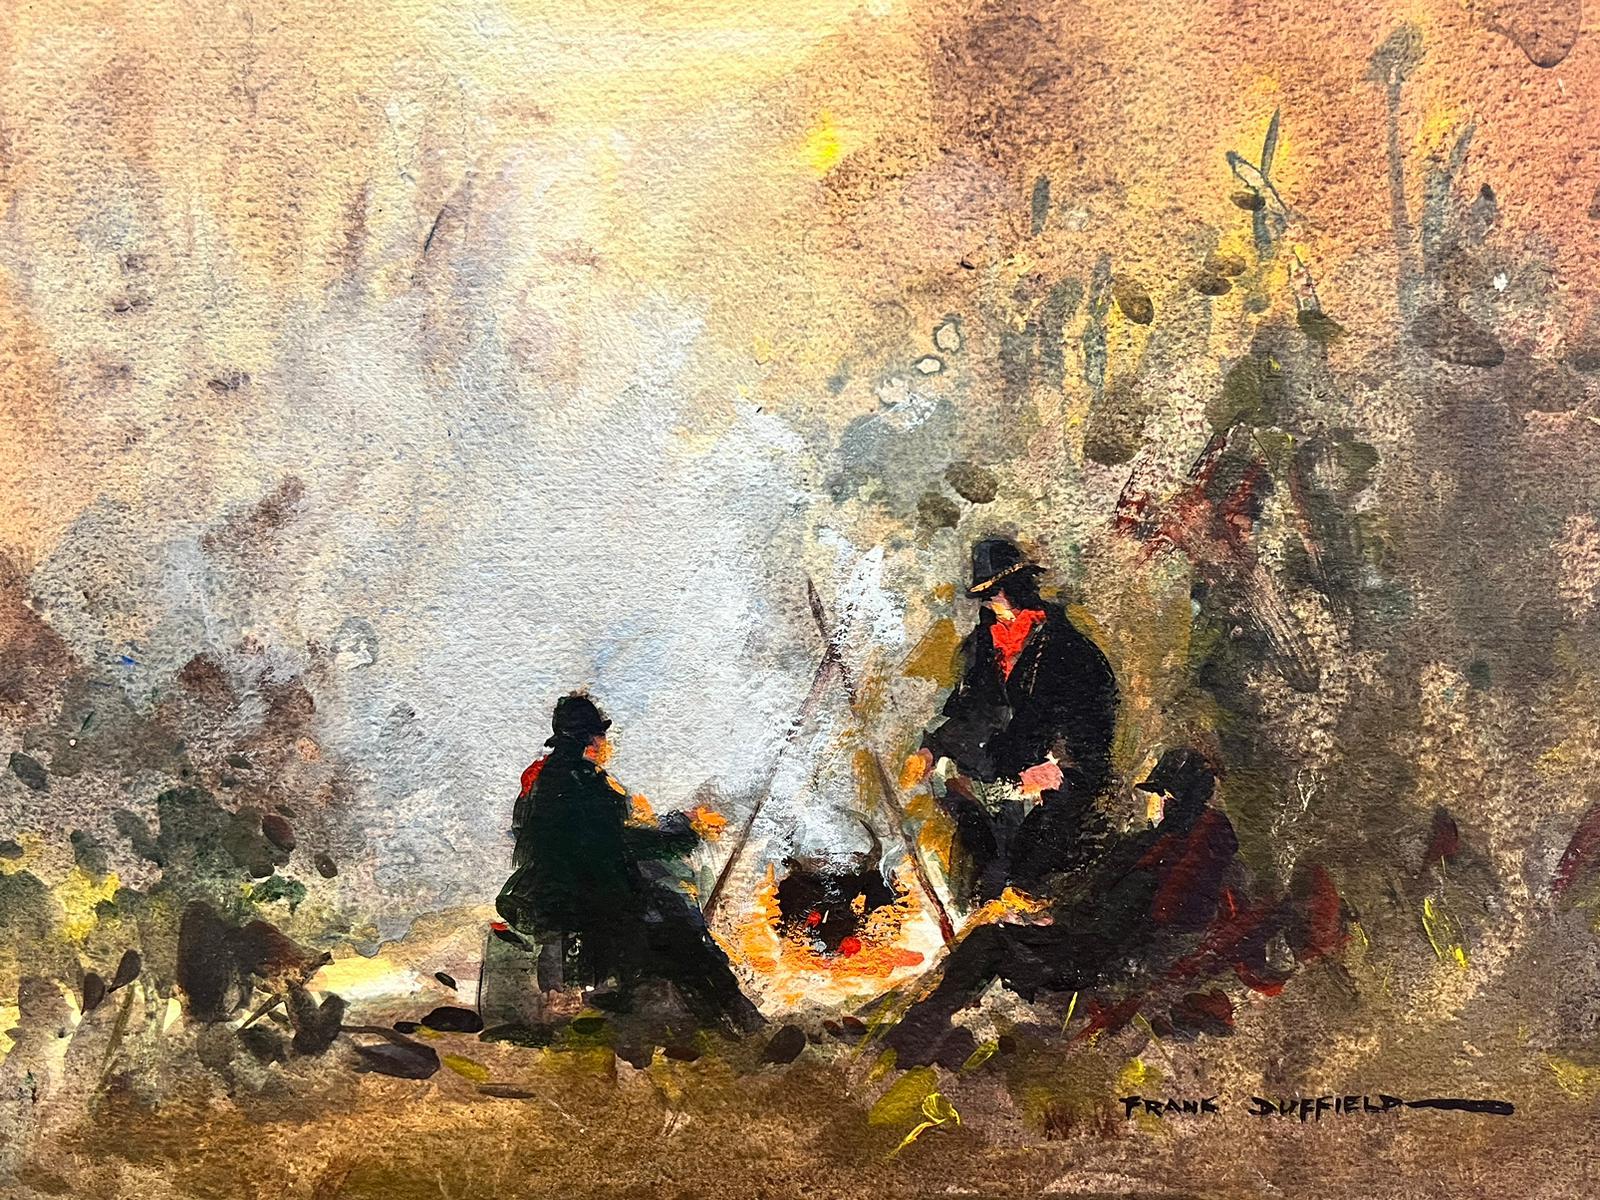 The Camp Fire
Frank Duffield (British, 1908-1982)
signed original watercolor painting on board, unframed
size: 10.75 x 15 inches
condition: overall very good, minor wear to the edges as is normal for an unframed work, minor staining from age/ light